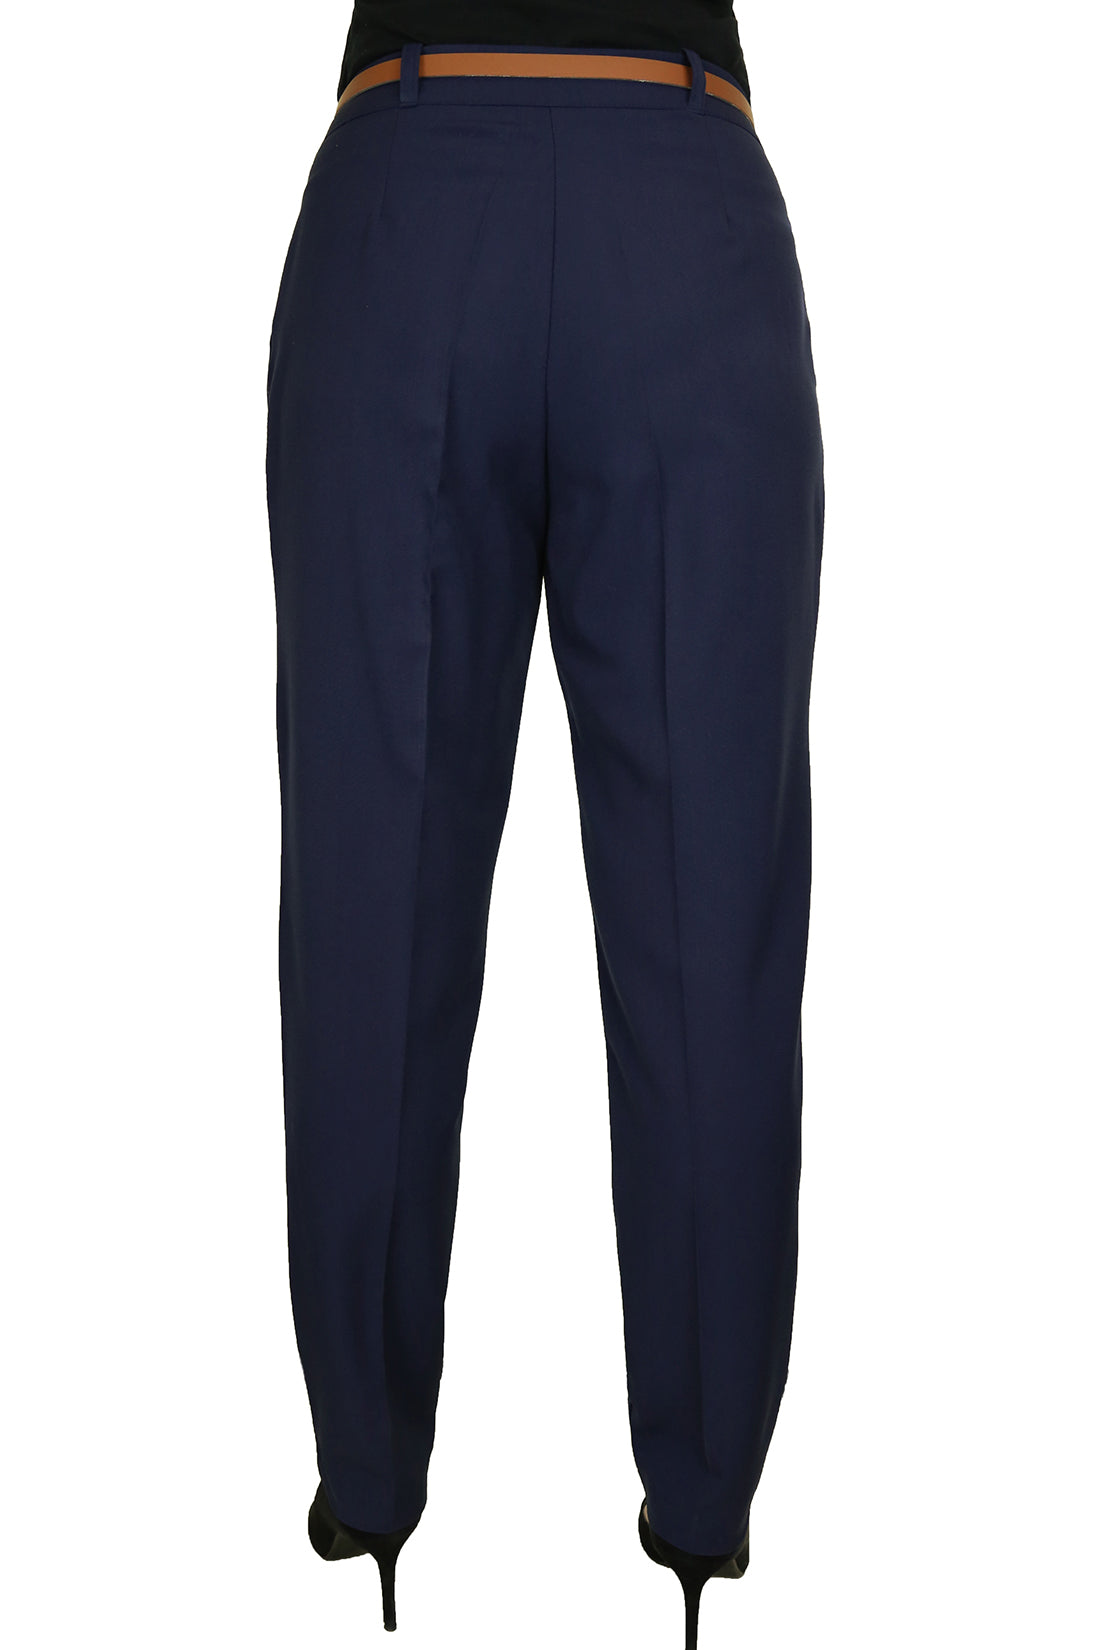 Ladies Smart Tapered Leg Trousers Navy Blue